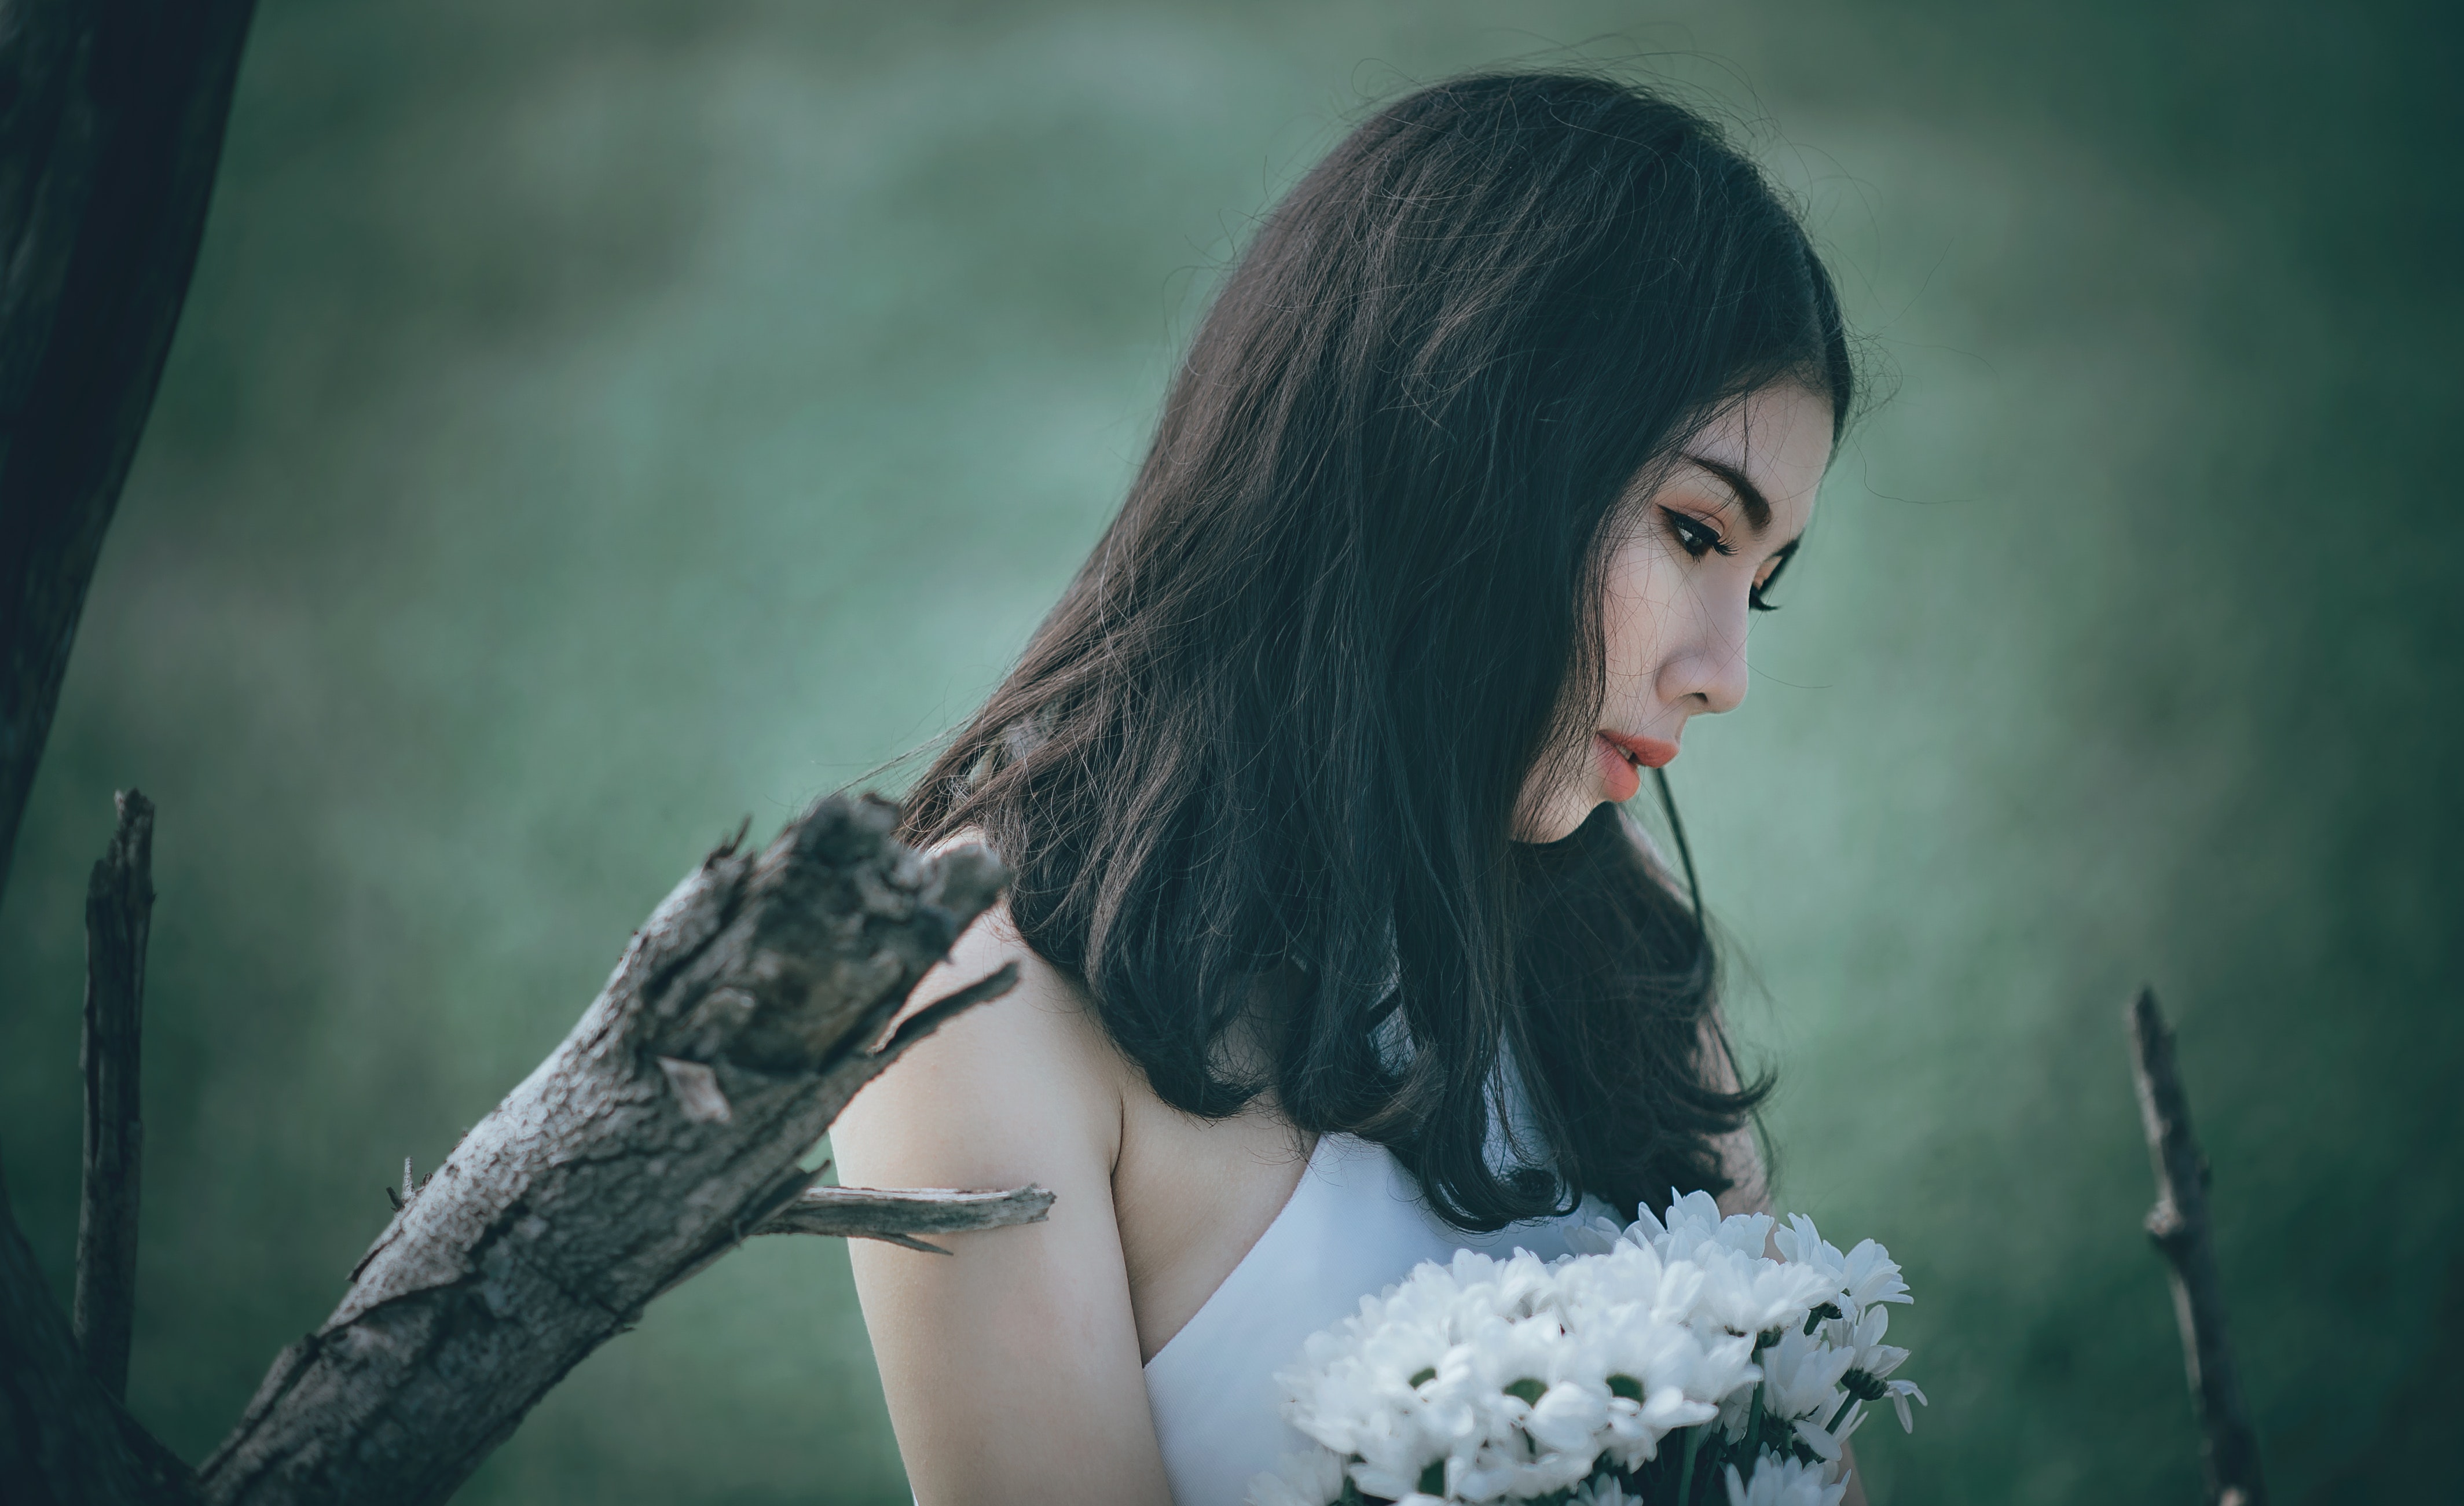 Woman in white top holding bouquet of white petaled flowers while looking down photo